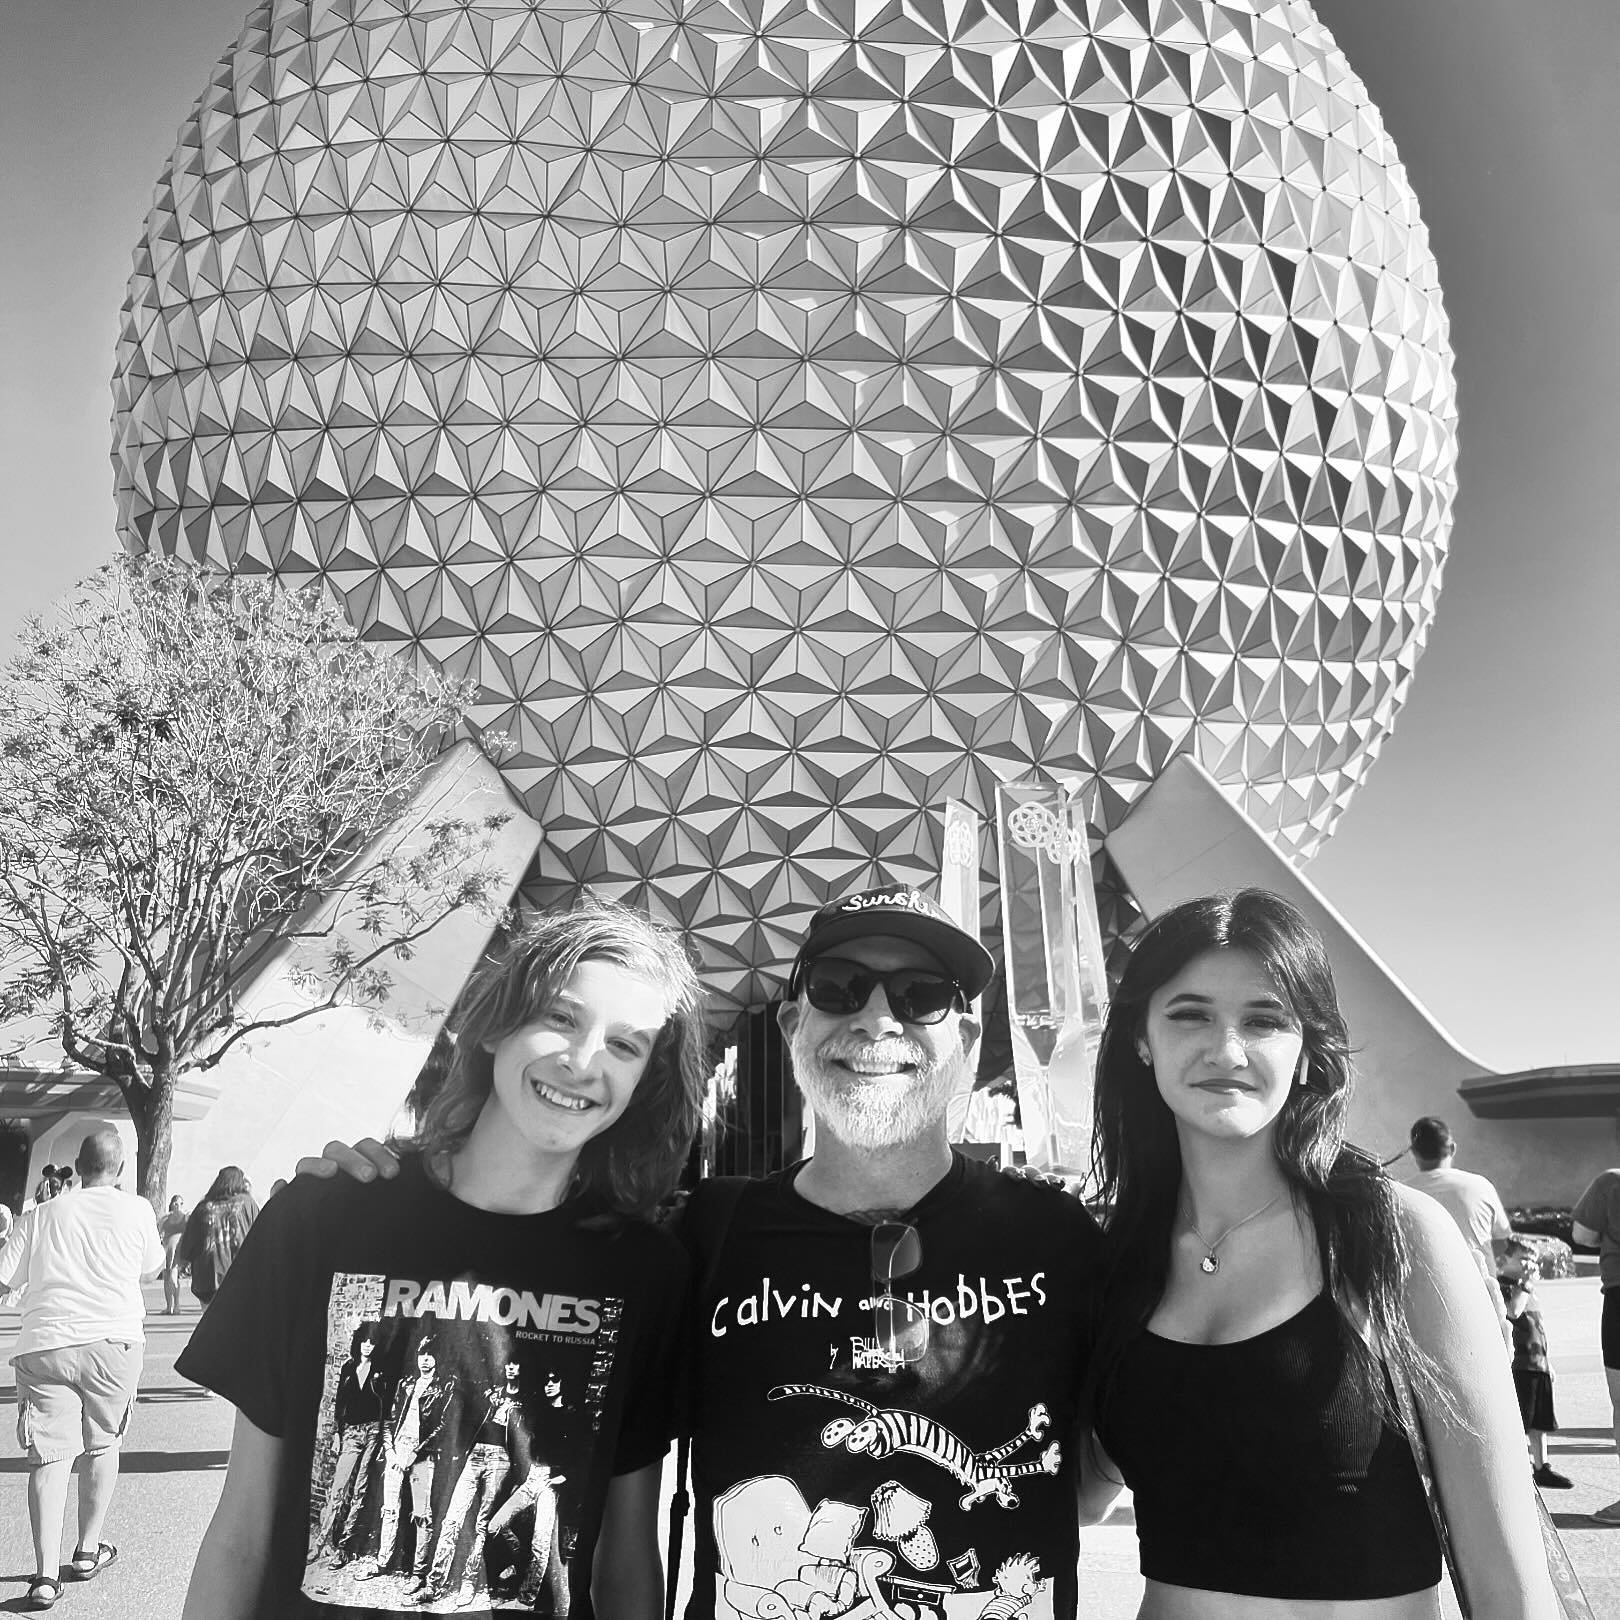 The Fam at Epcot!

They got&hellip;tall!?!